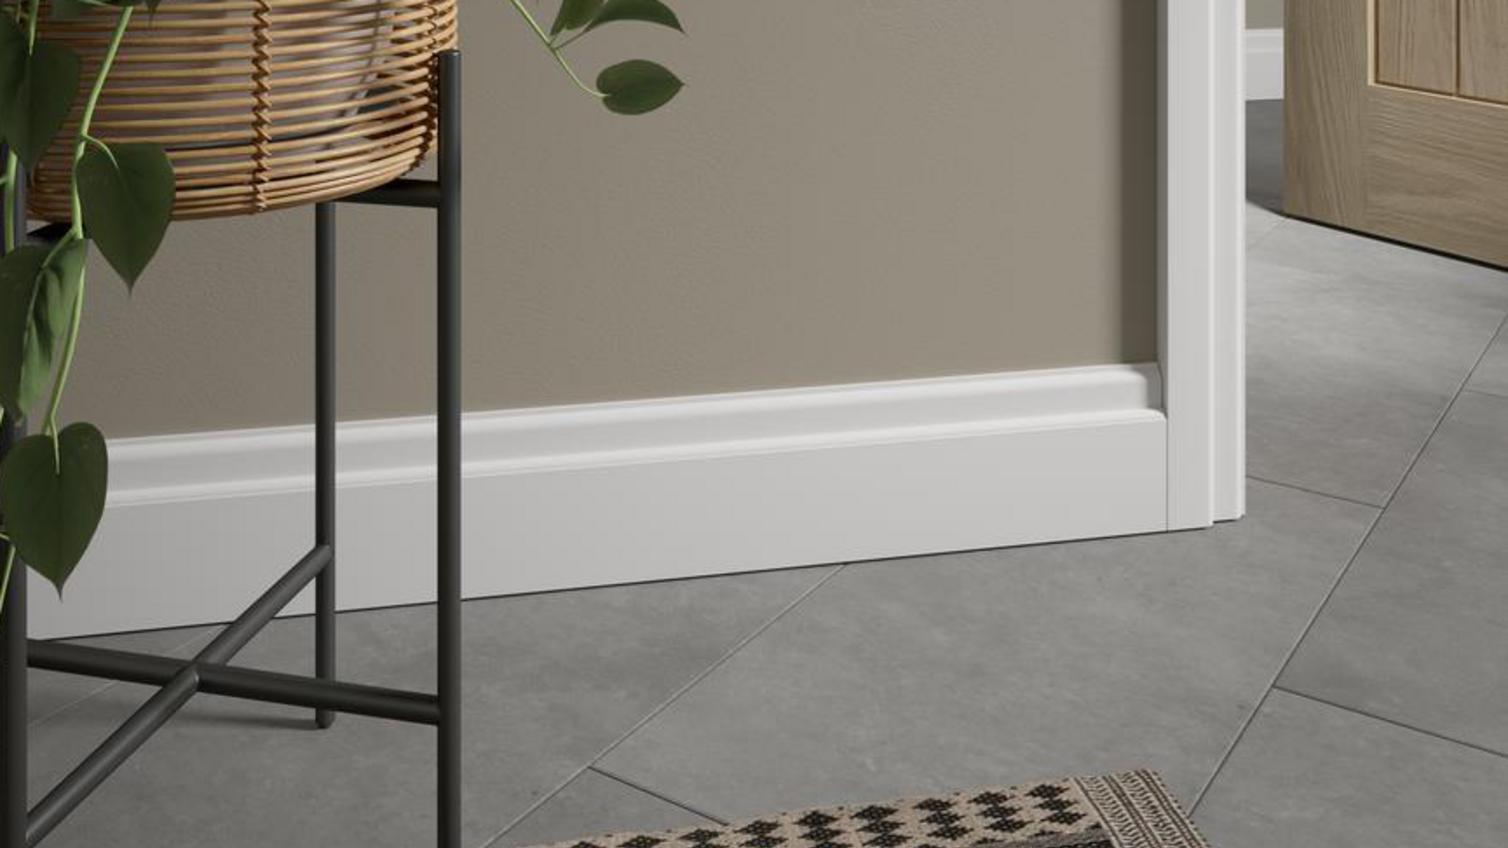 Simple timber skirting in a budget utility room.